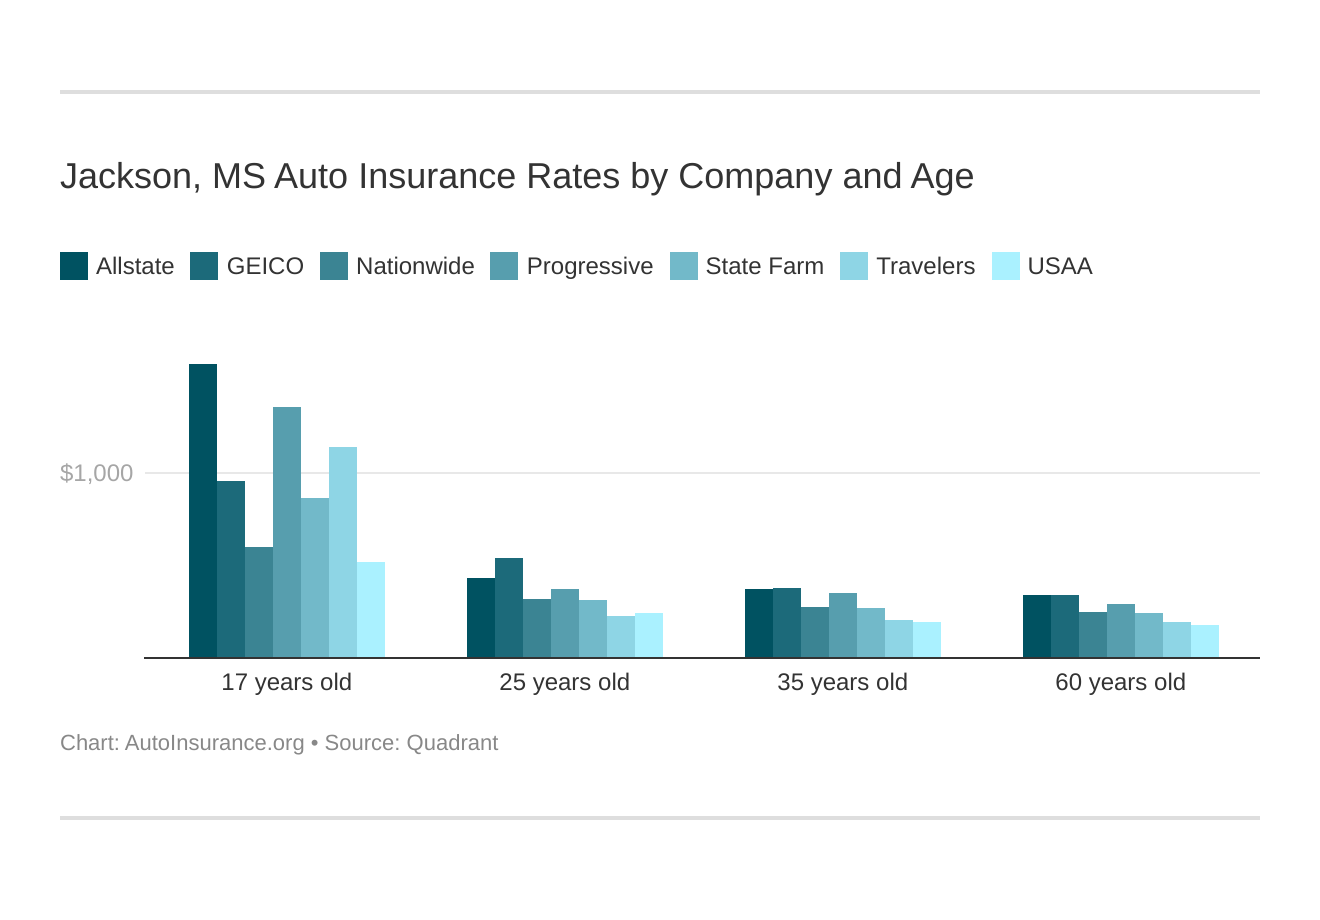 Jackson, MS Auto Insurance Rates by Company and Age